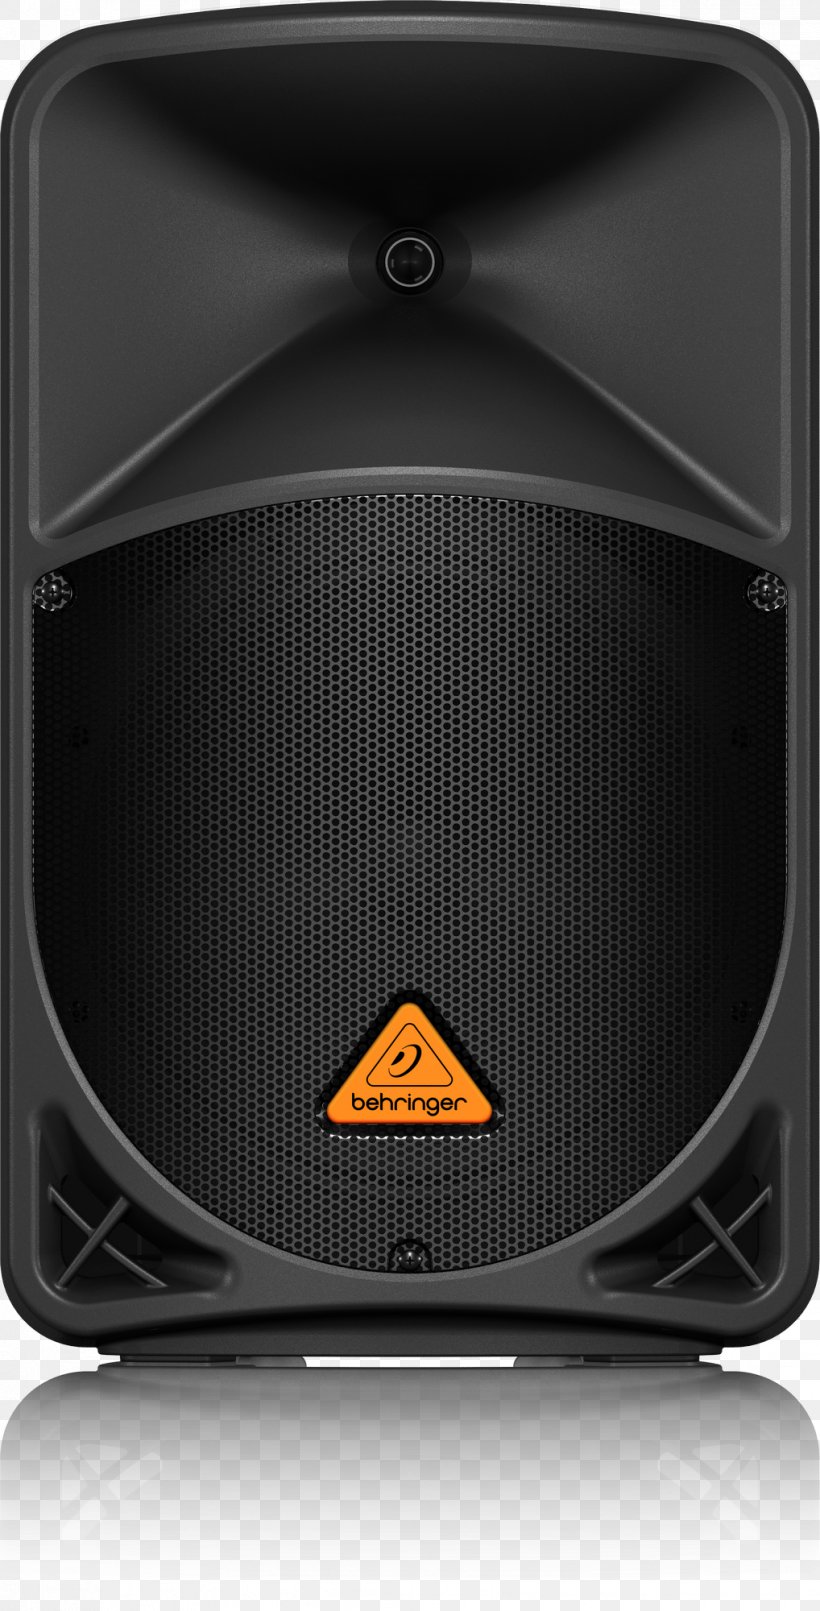 Microphone Loudspeaker Powered Speakers Public Address Systems Behringer, PNG, 1018x2000px, Microphone, Audio, Audio Equipment, Behringer, Bluetooth Download Free